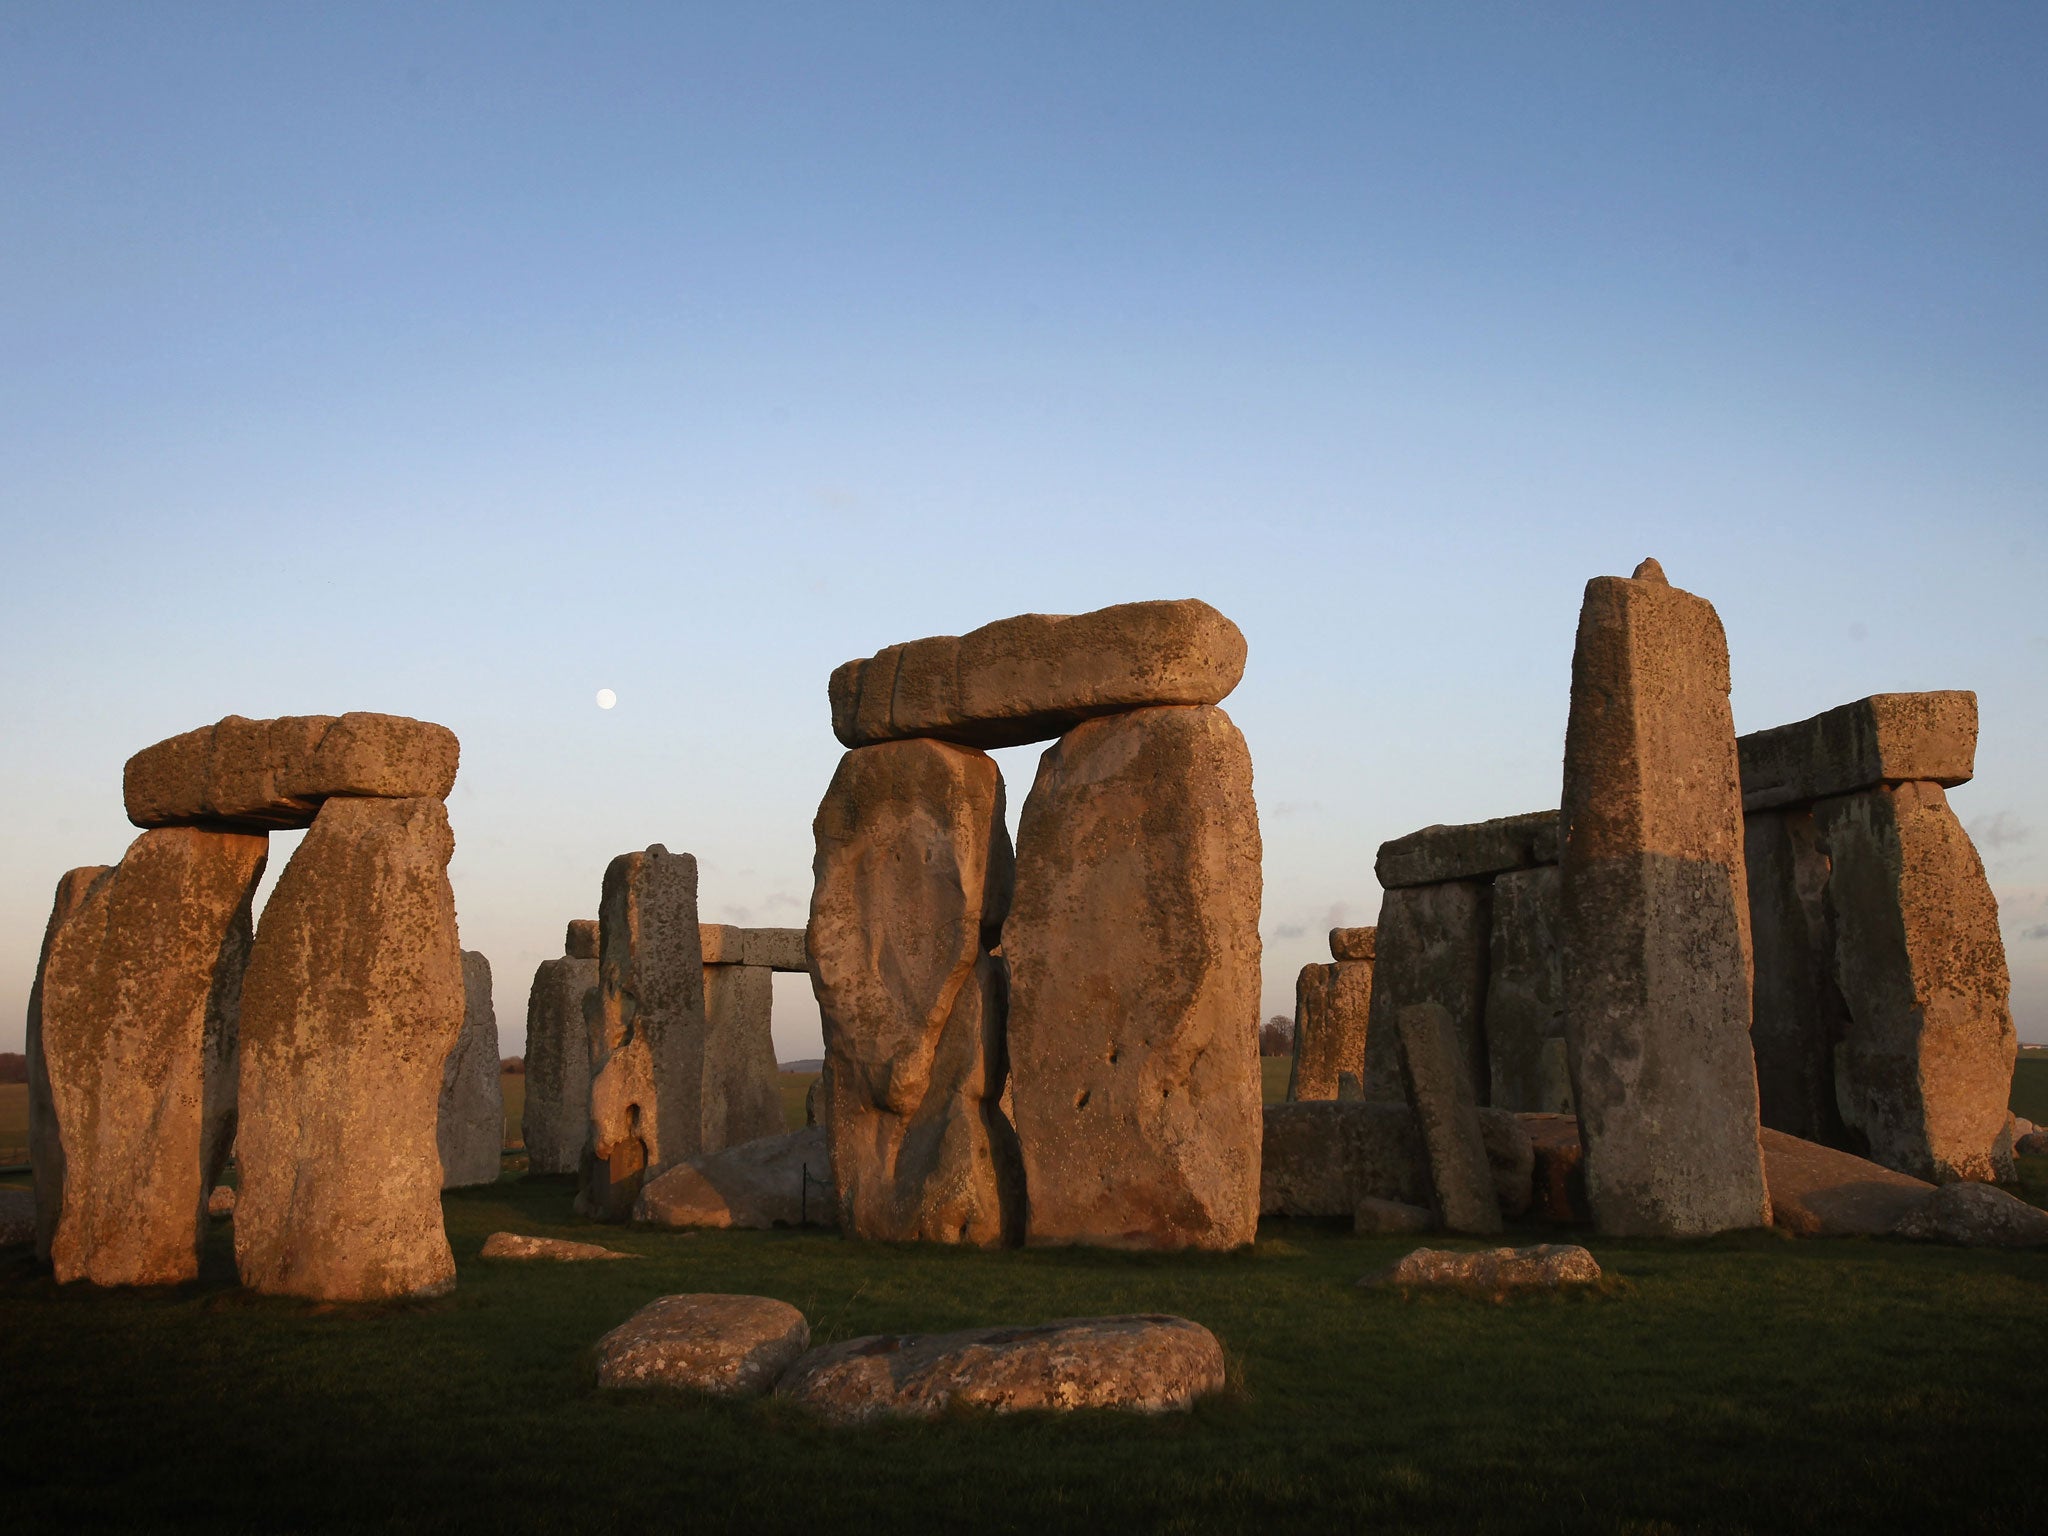 Researchers claim the sonorous quality of Stonehenge pillars explain why they were transported from Wales to Wiltshire